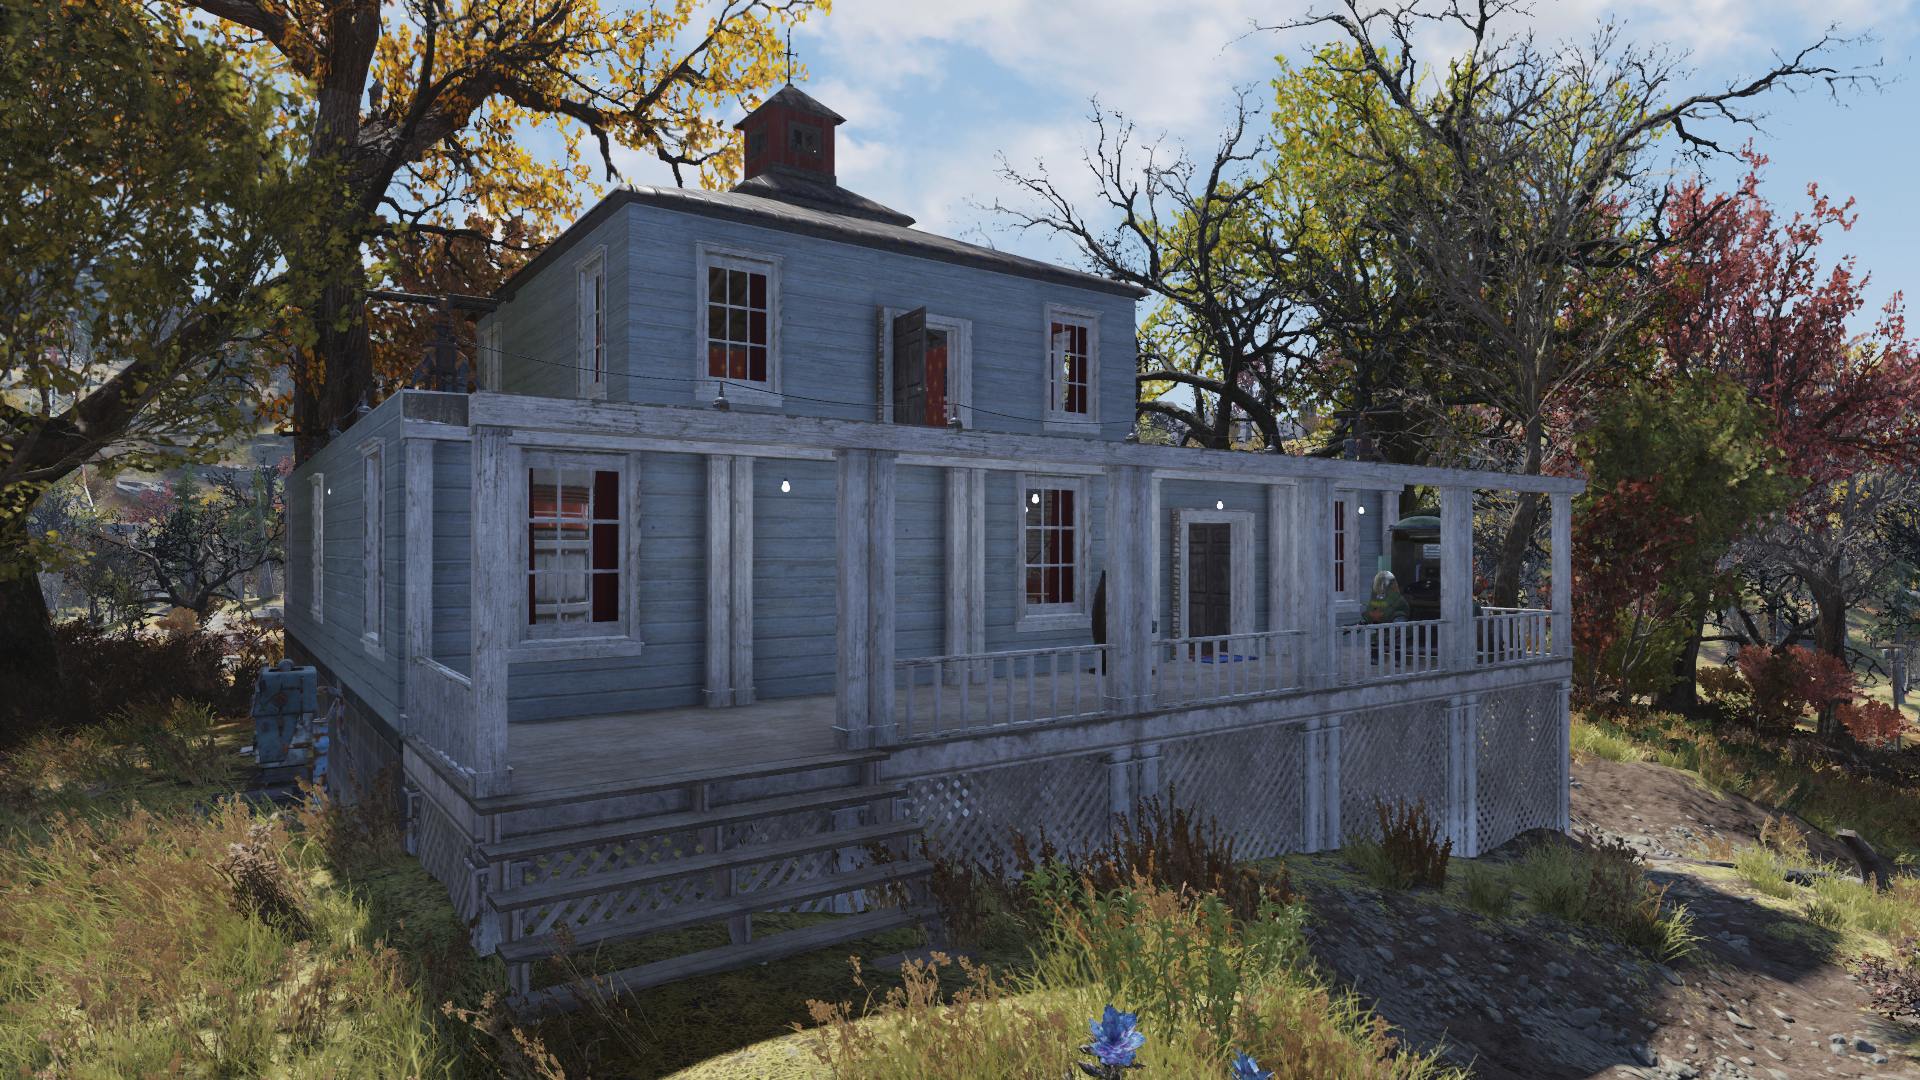 Fallout 76 State of the Game - a pretty wood-clad home painted baby blue with white railings